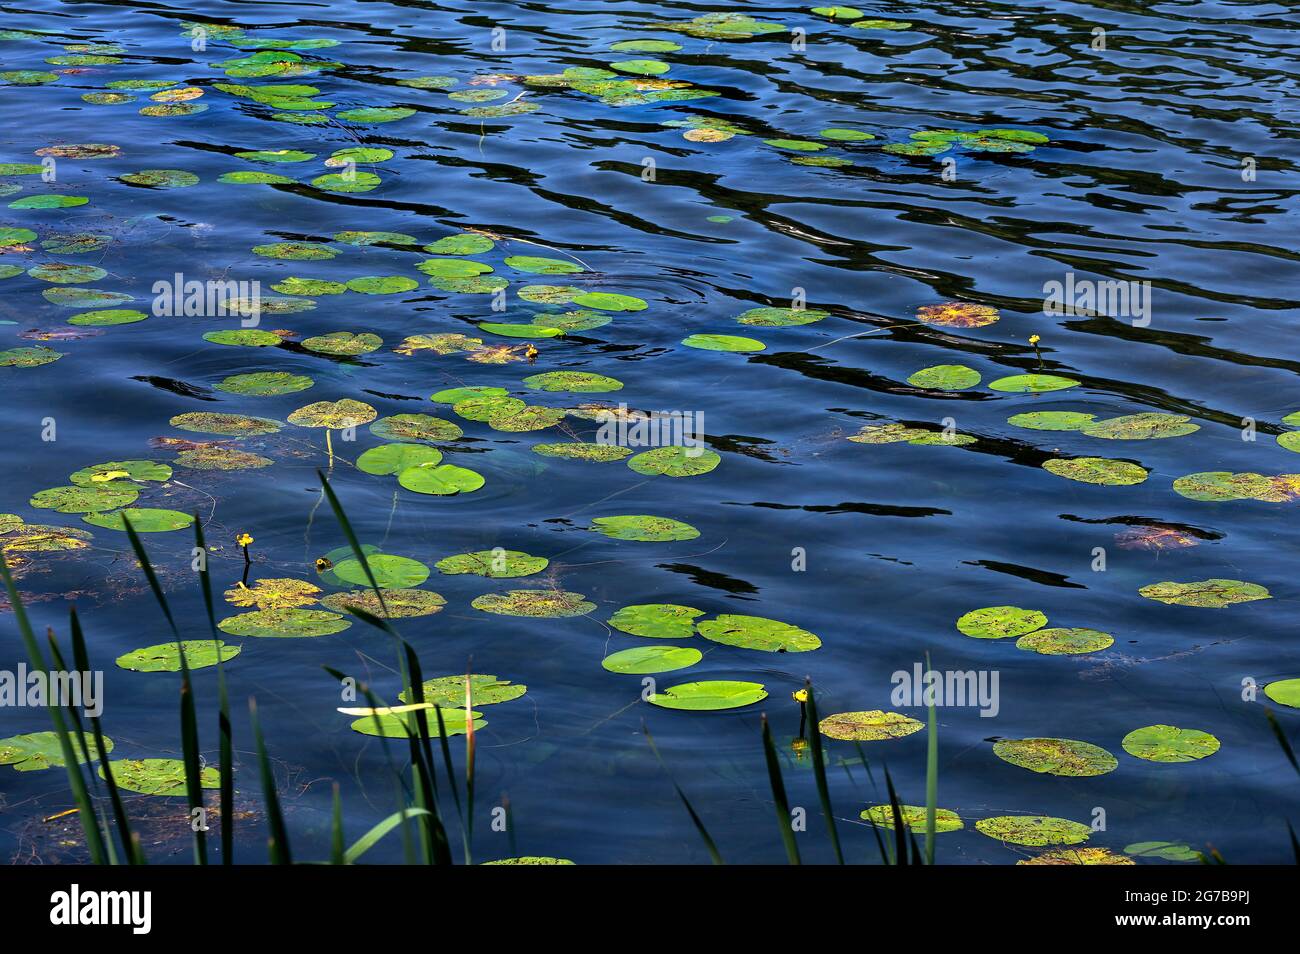 Lily pads, Klostersee, Seeon-Seebruck, Upper Bavaria, Bavaria, Germany Stock Photo